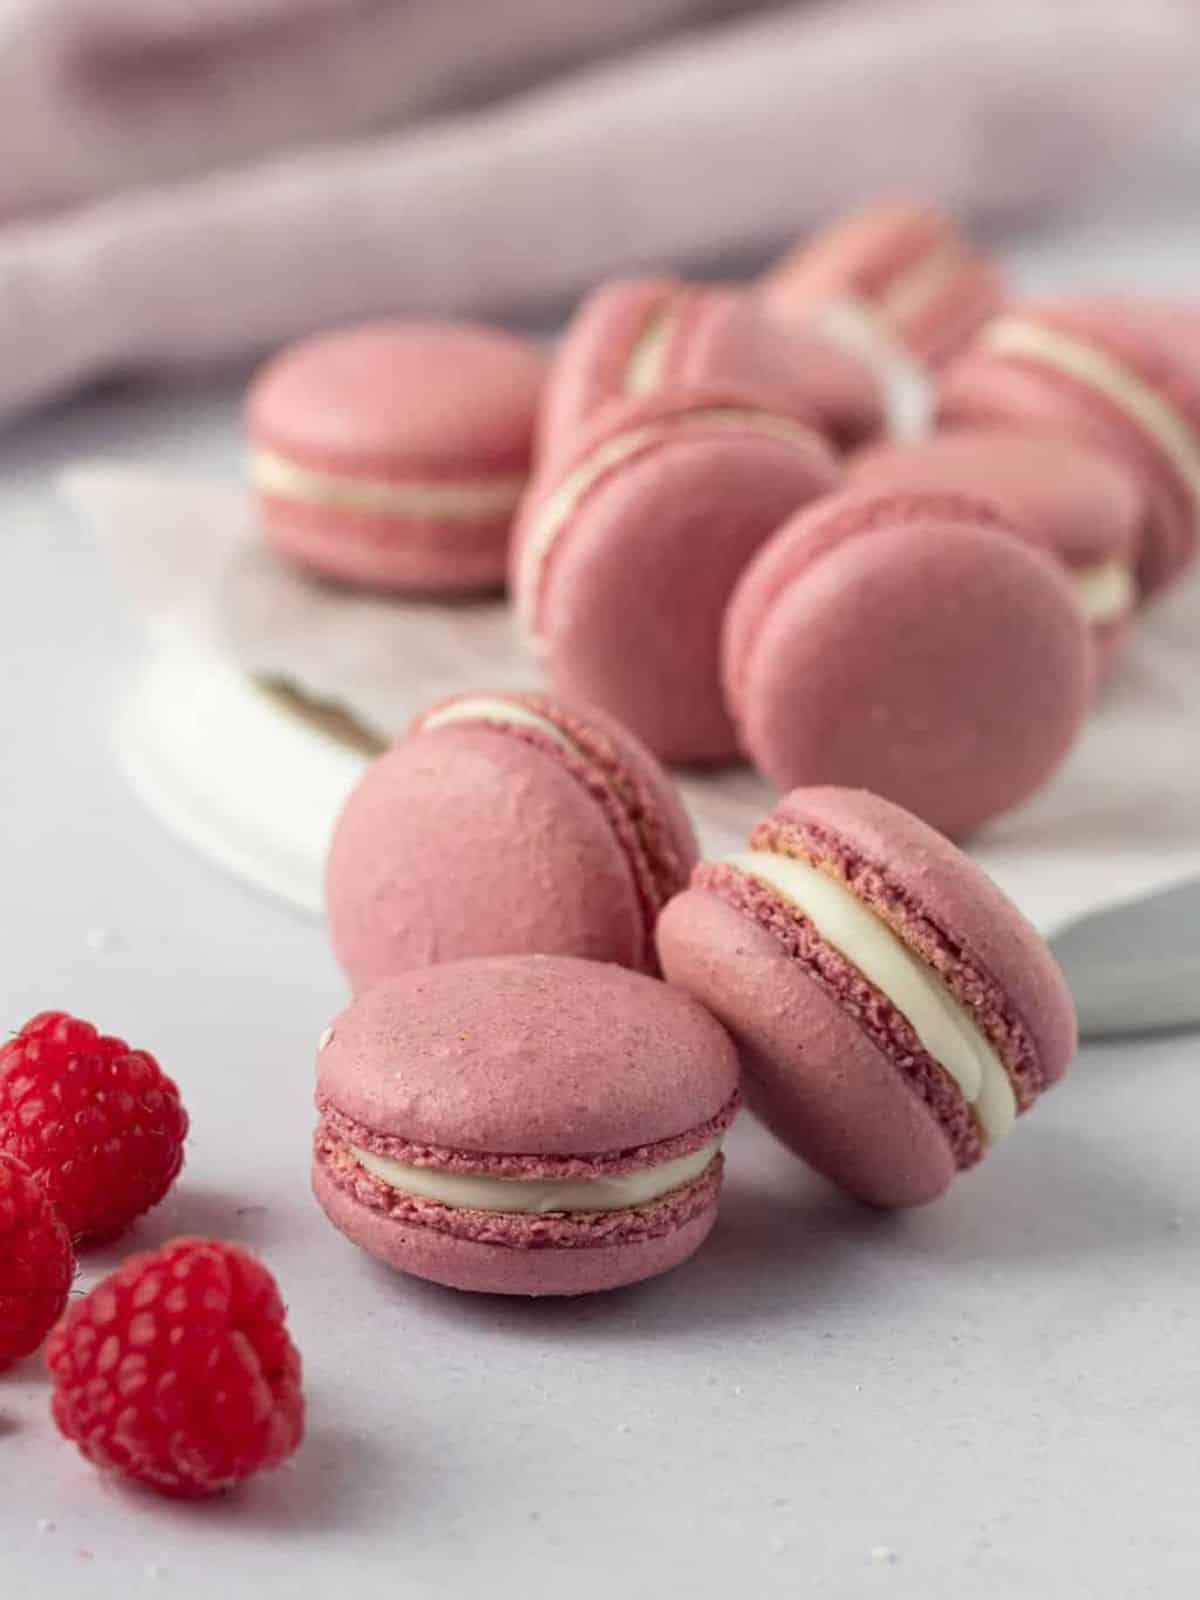 Delightful Pink Raspberry Macarons with Creamy White Chocolate Buttercream filling